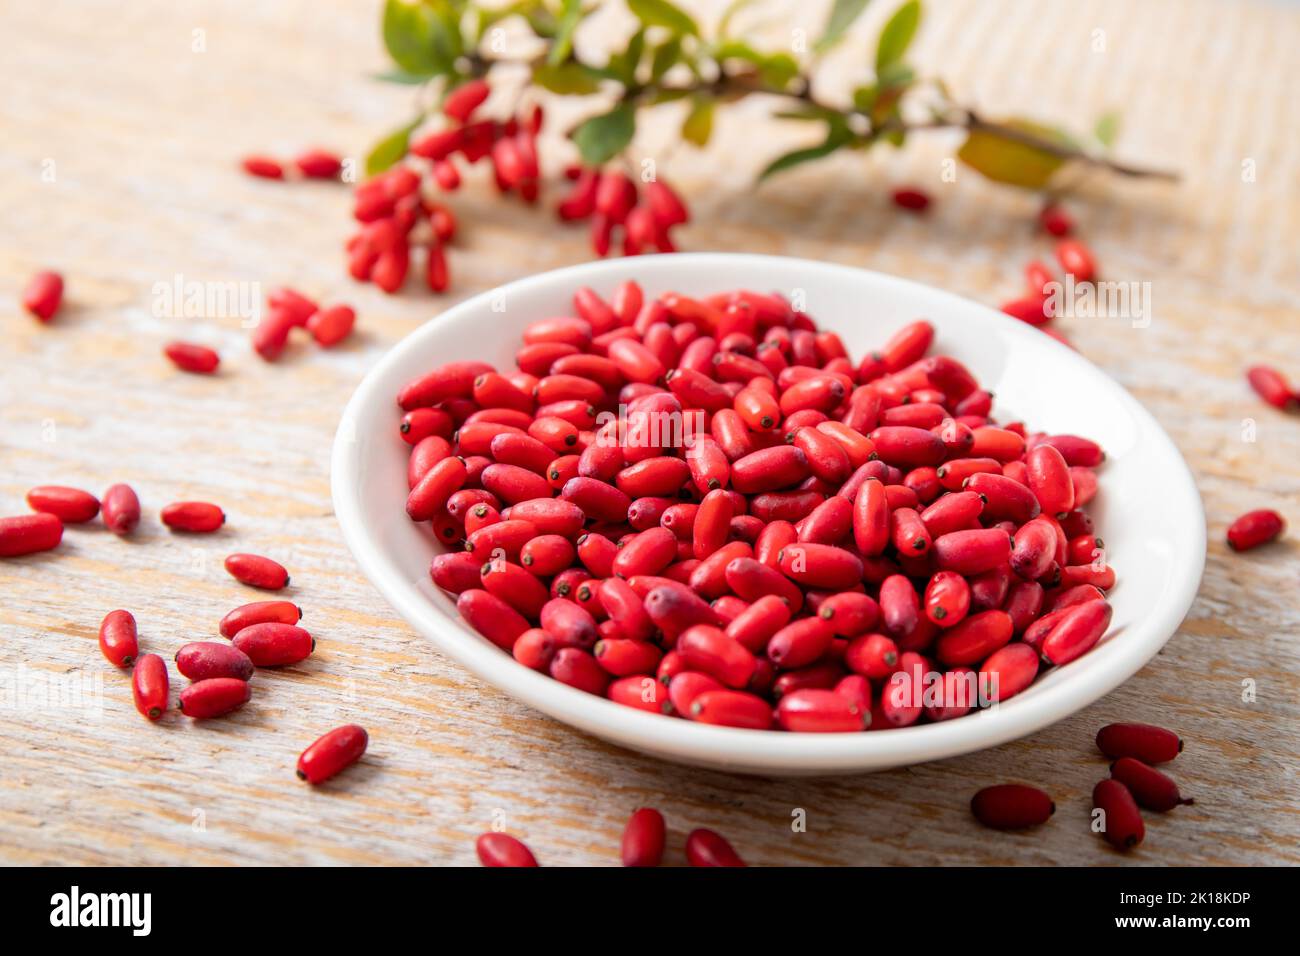 Pile of Berberis vulgaris also known as common barberry, European barberry or barberry on plate in home kicthen. Edible herbal medicinal fruit. Stock Photo